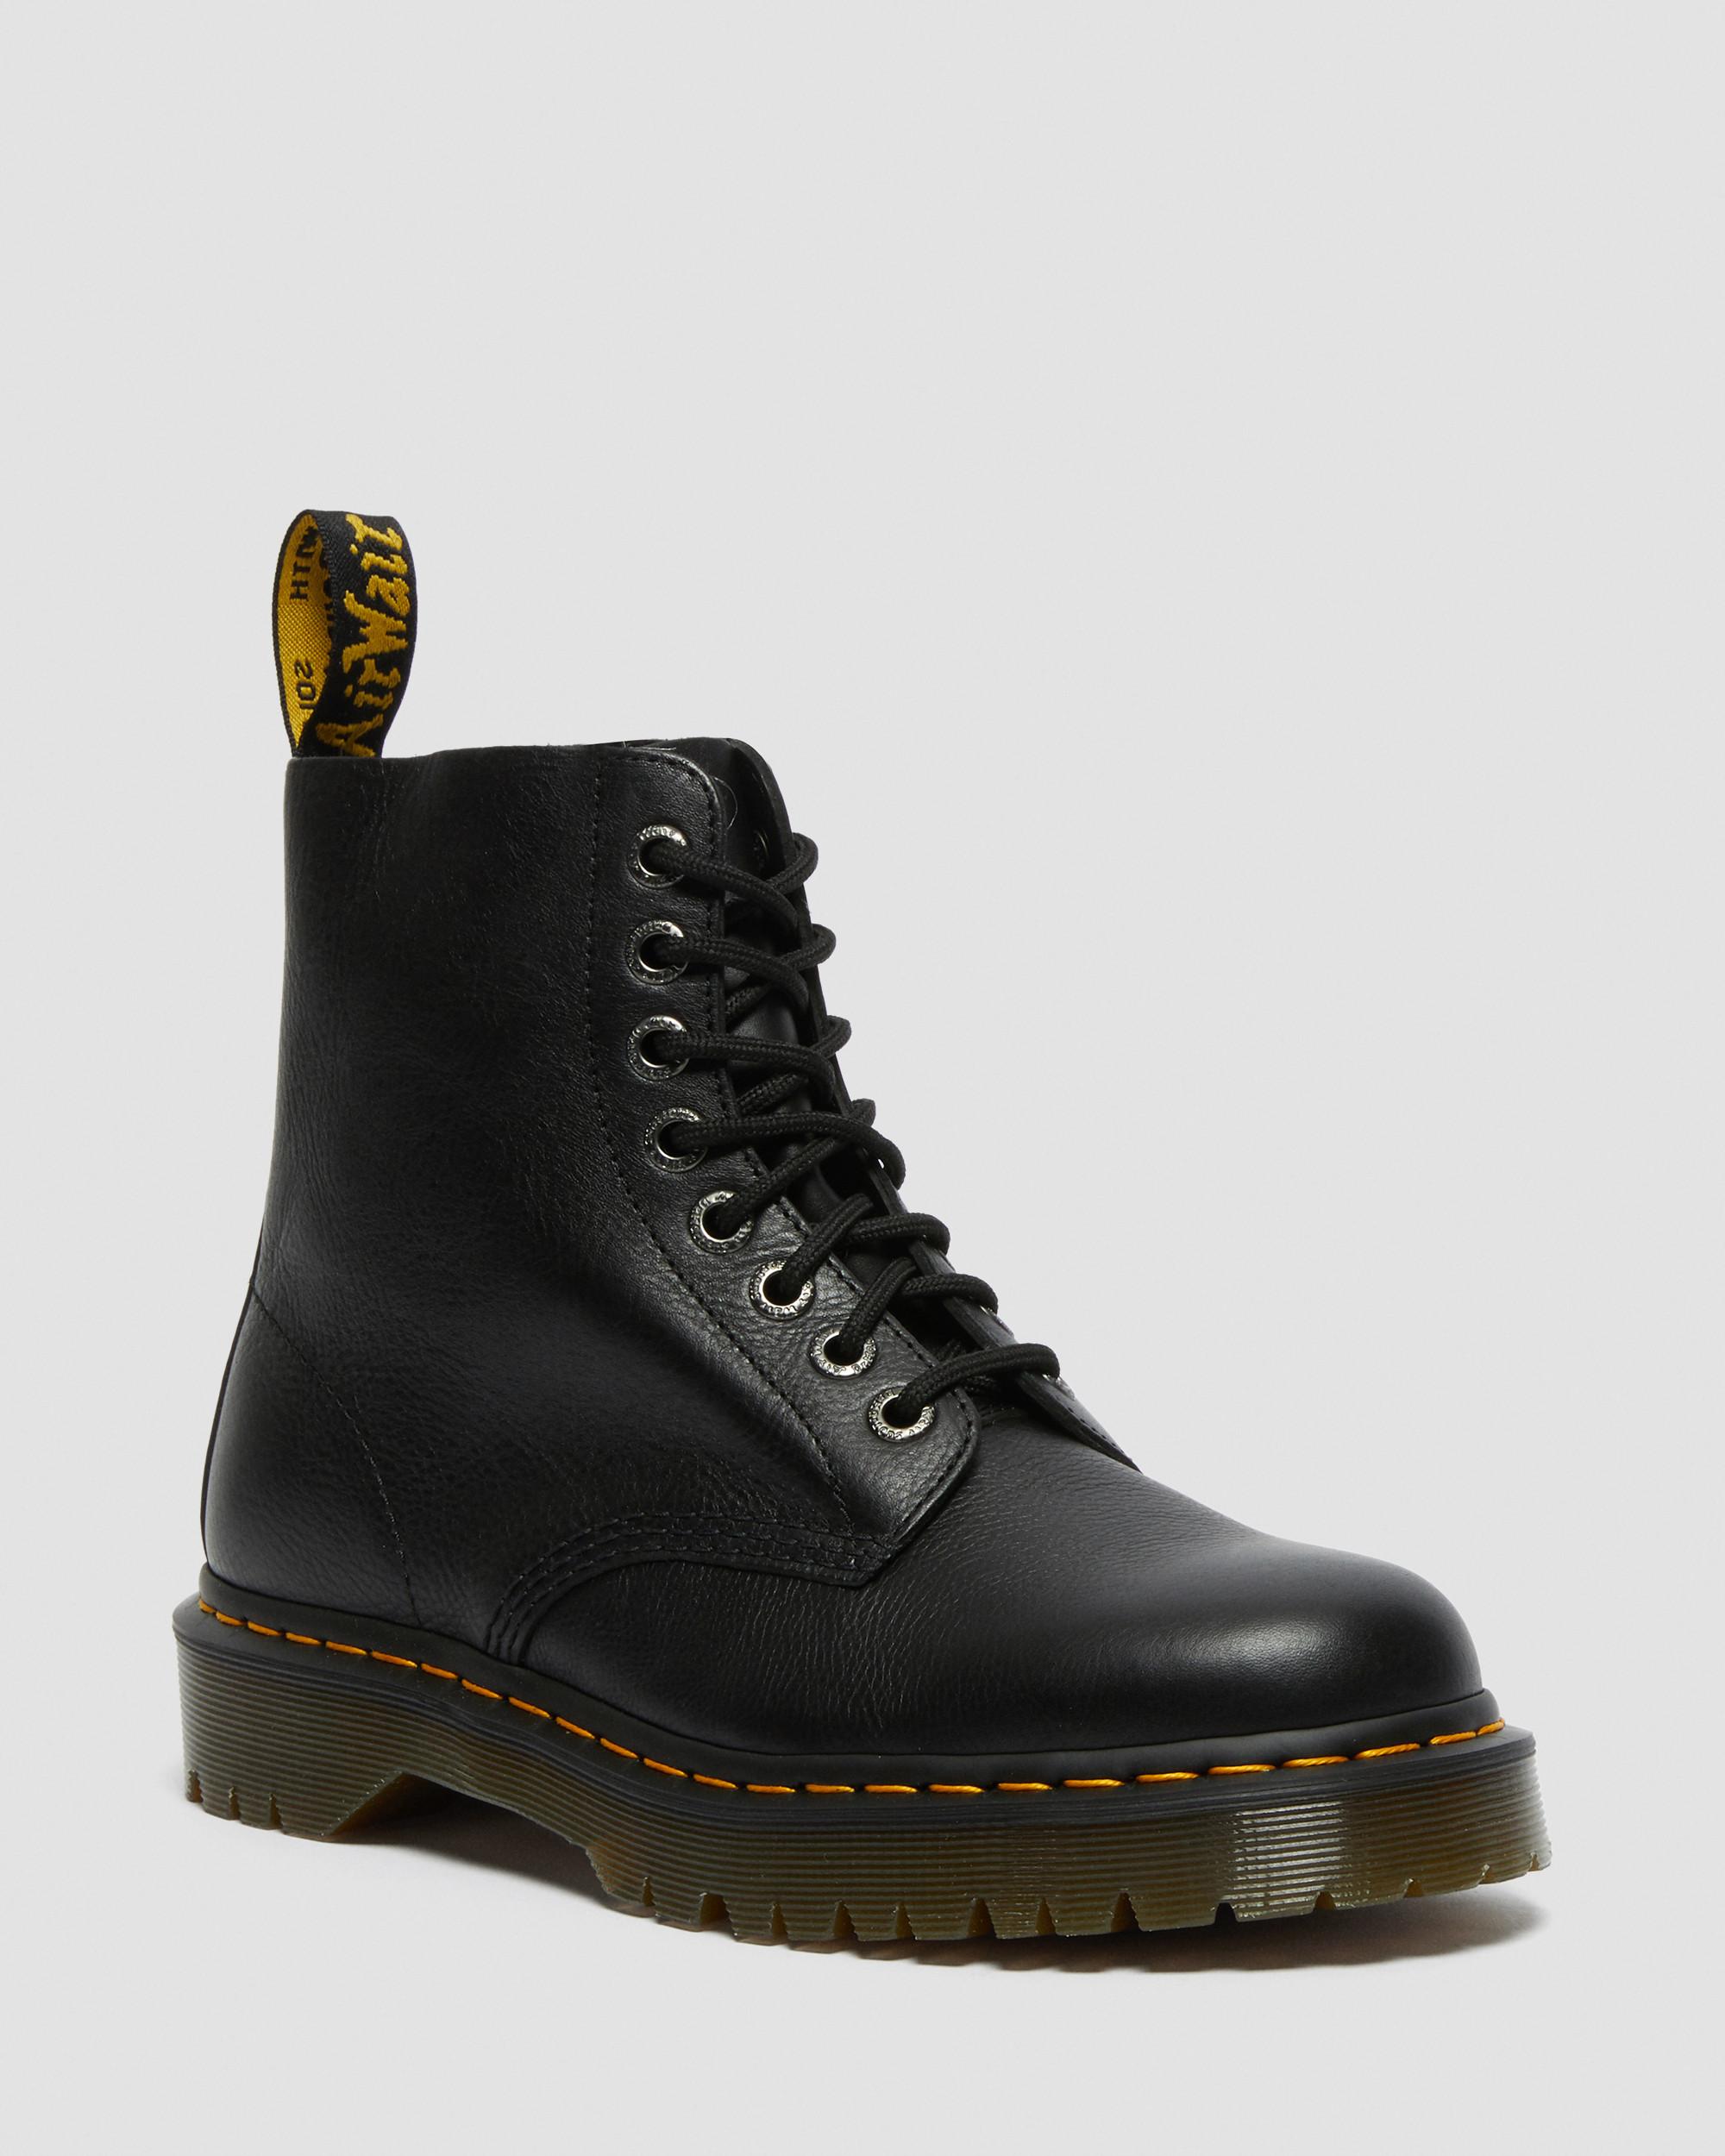 1460 Pascal Bex Leather Lace Up Boots1460 Pascal Bex Pisa Leather Lace Up Boots Dr. Martens